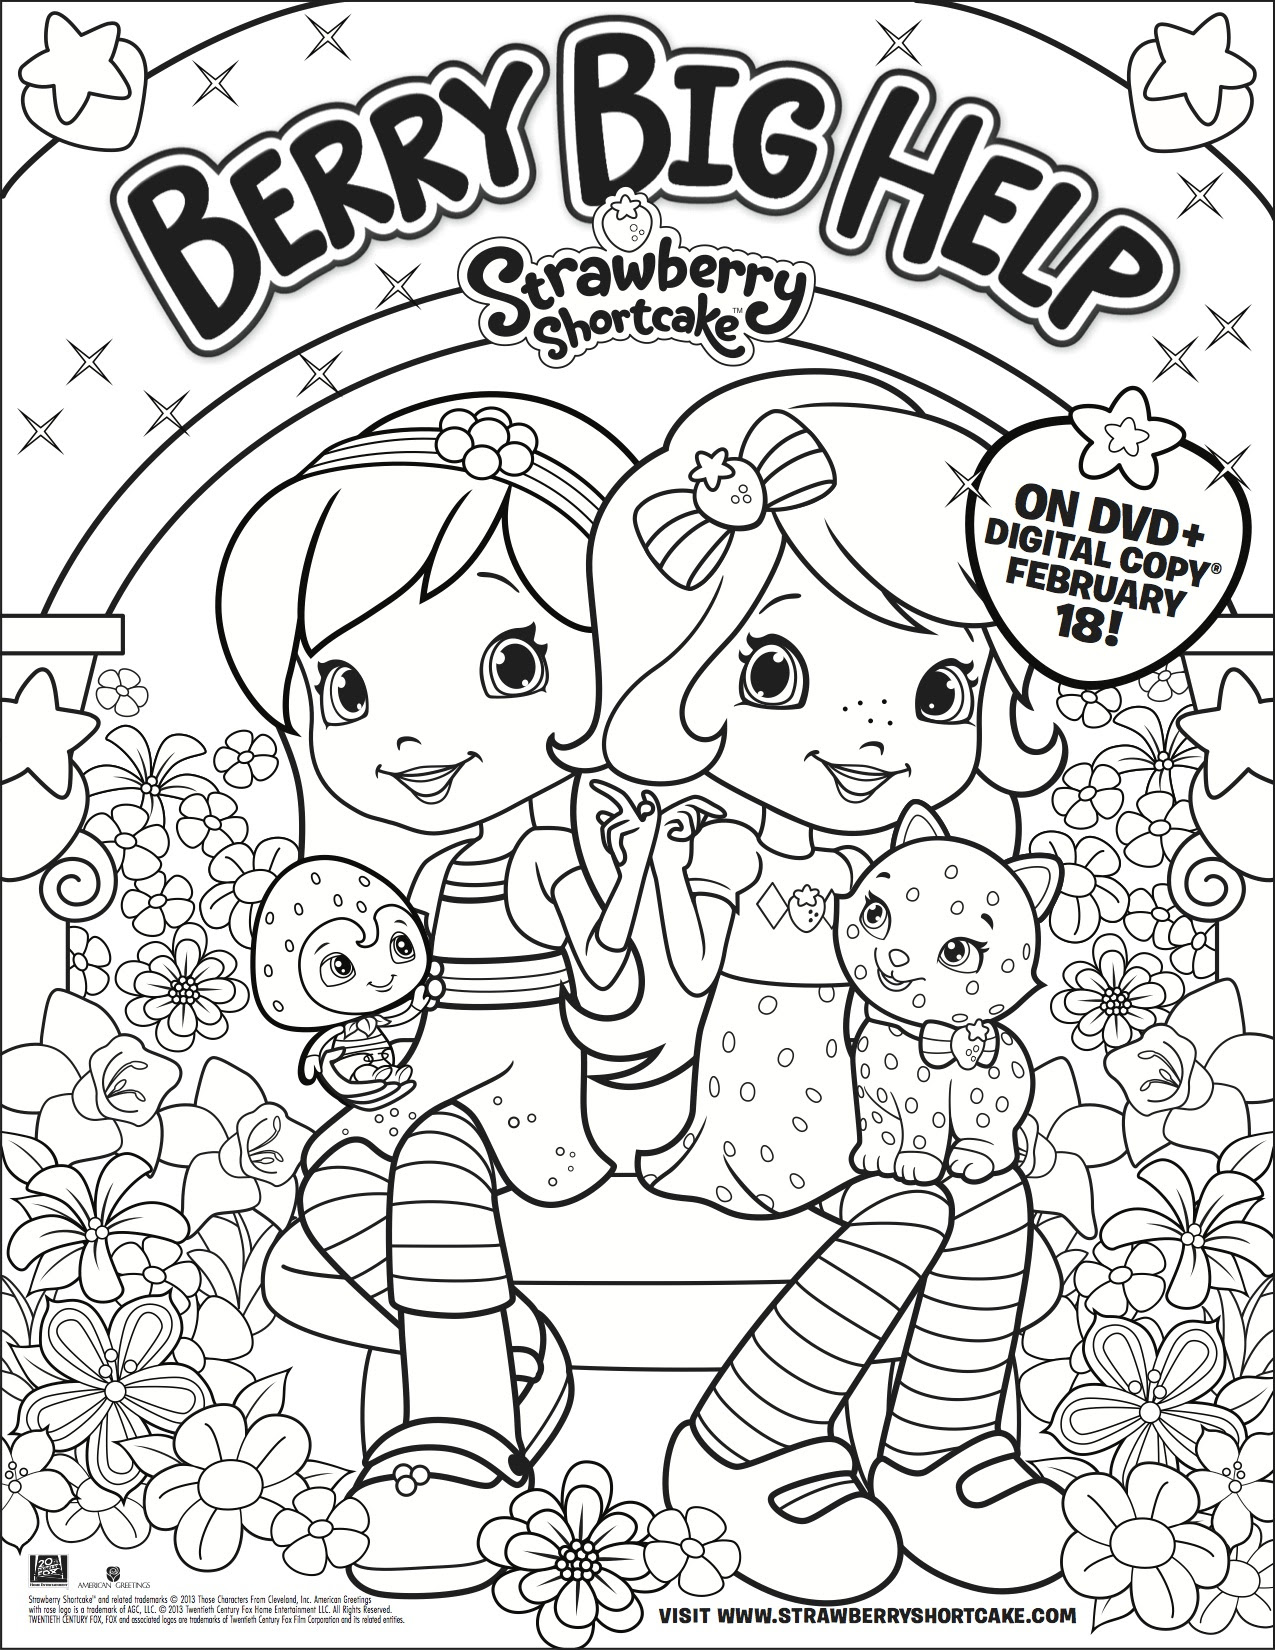 Strawberry Shortcake DVD Berry Big Help here is a free printable coloring page for your children Simply right click on the image save it or open it